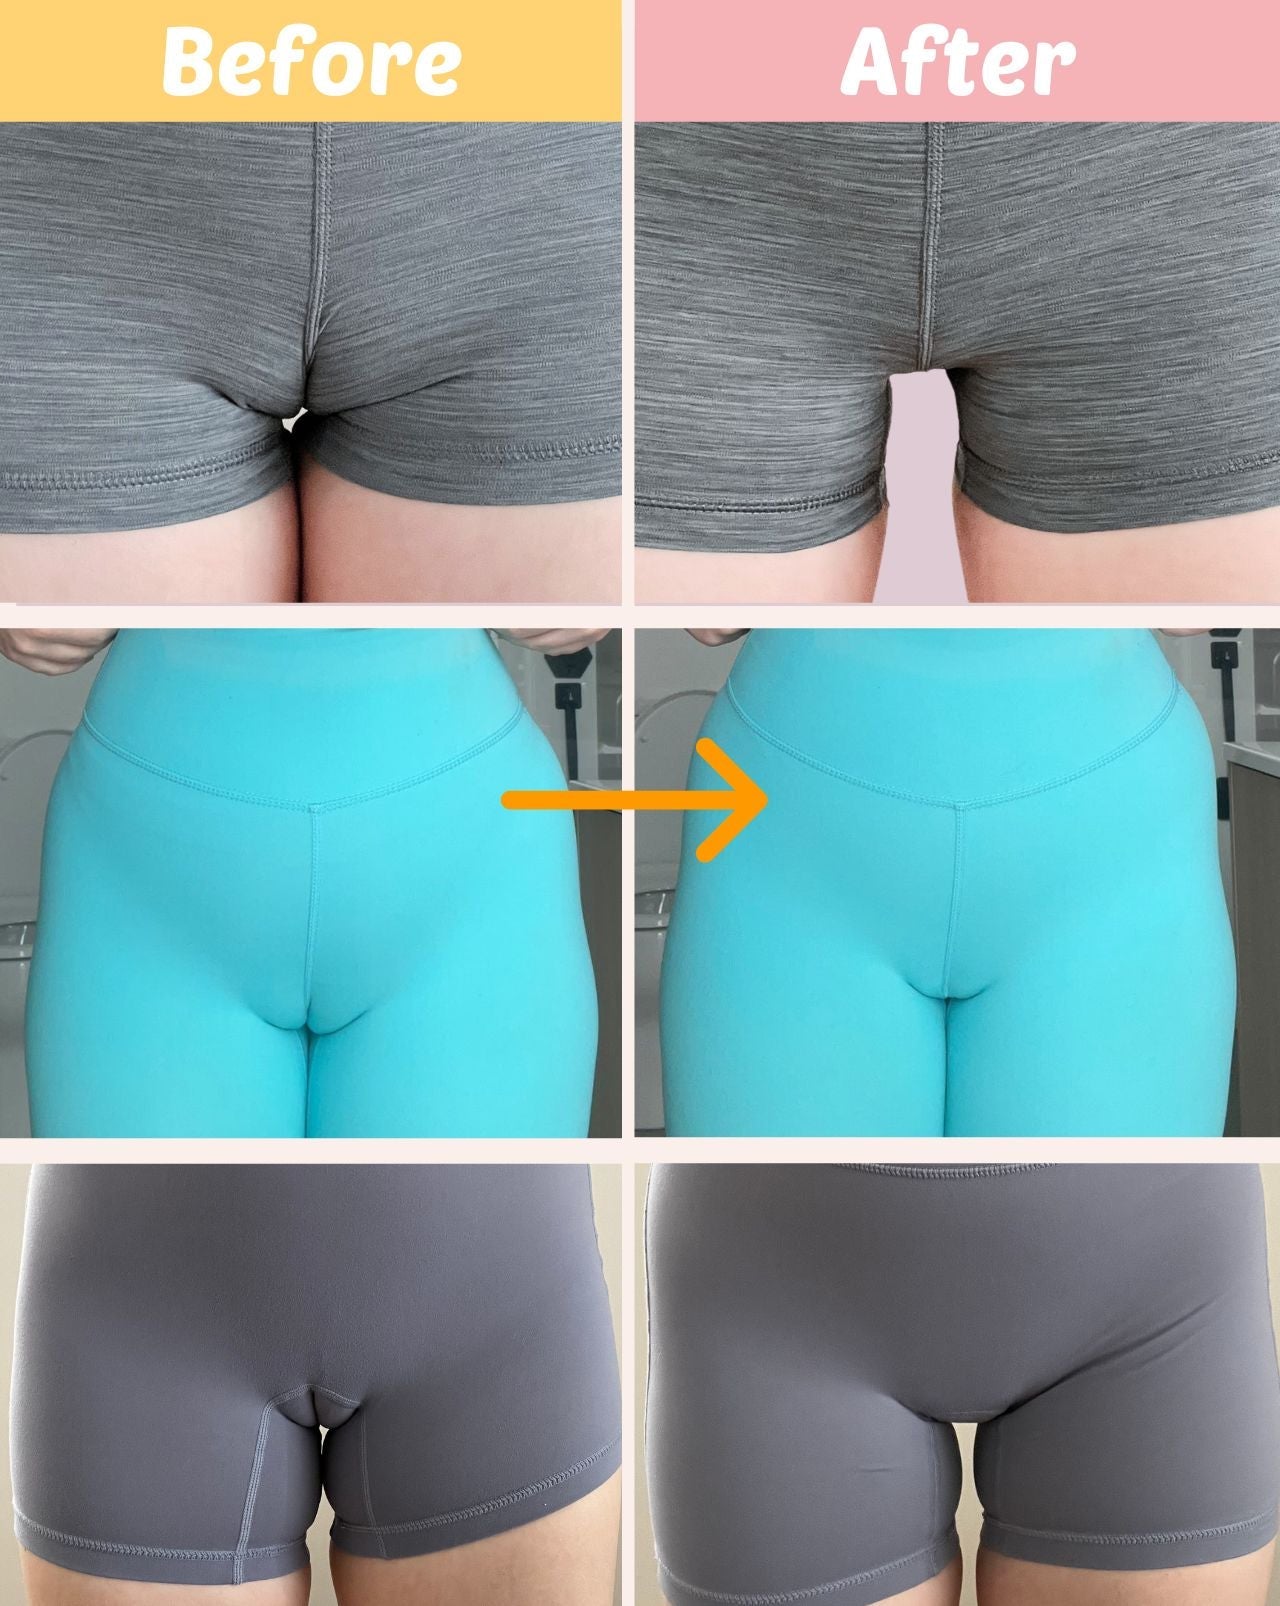 VIDEO: Camel Toe Underwear-A New Trend in Asia? – CheapUndies